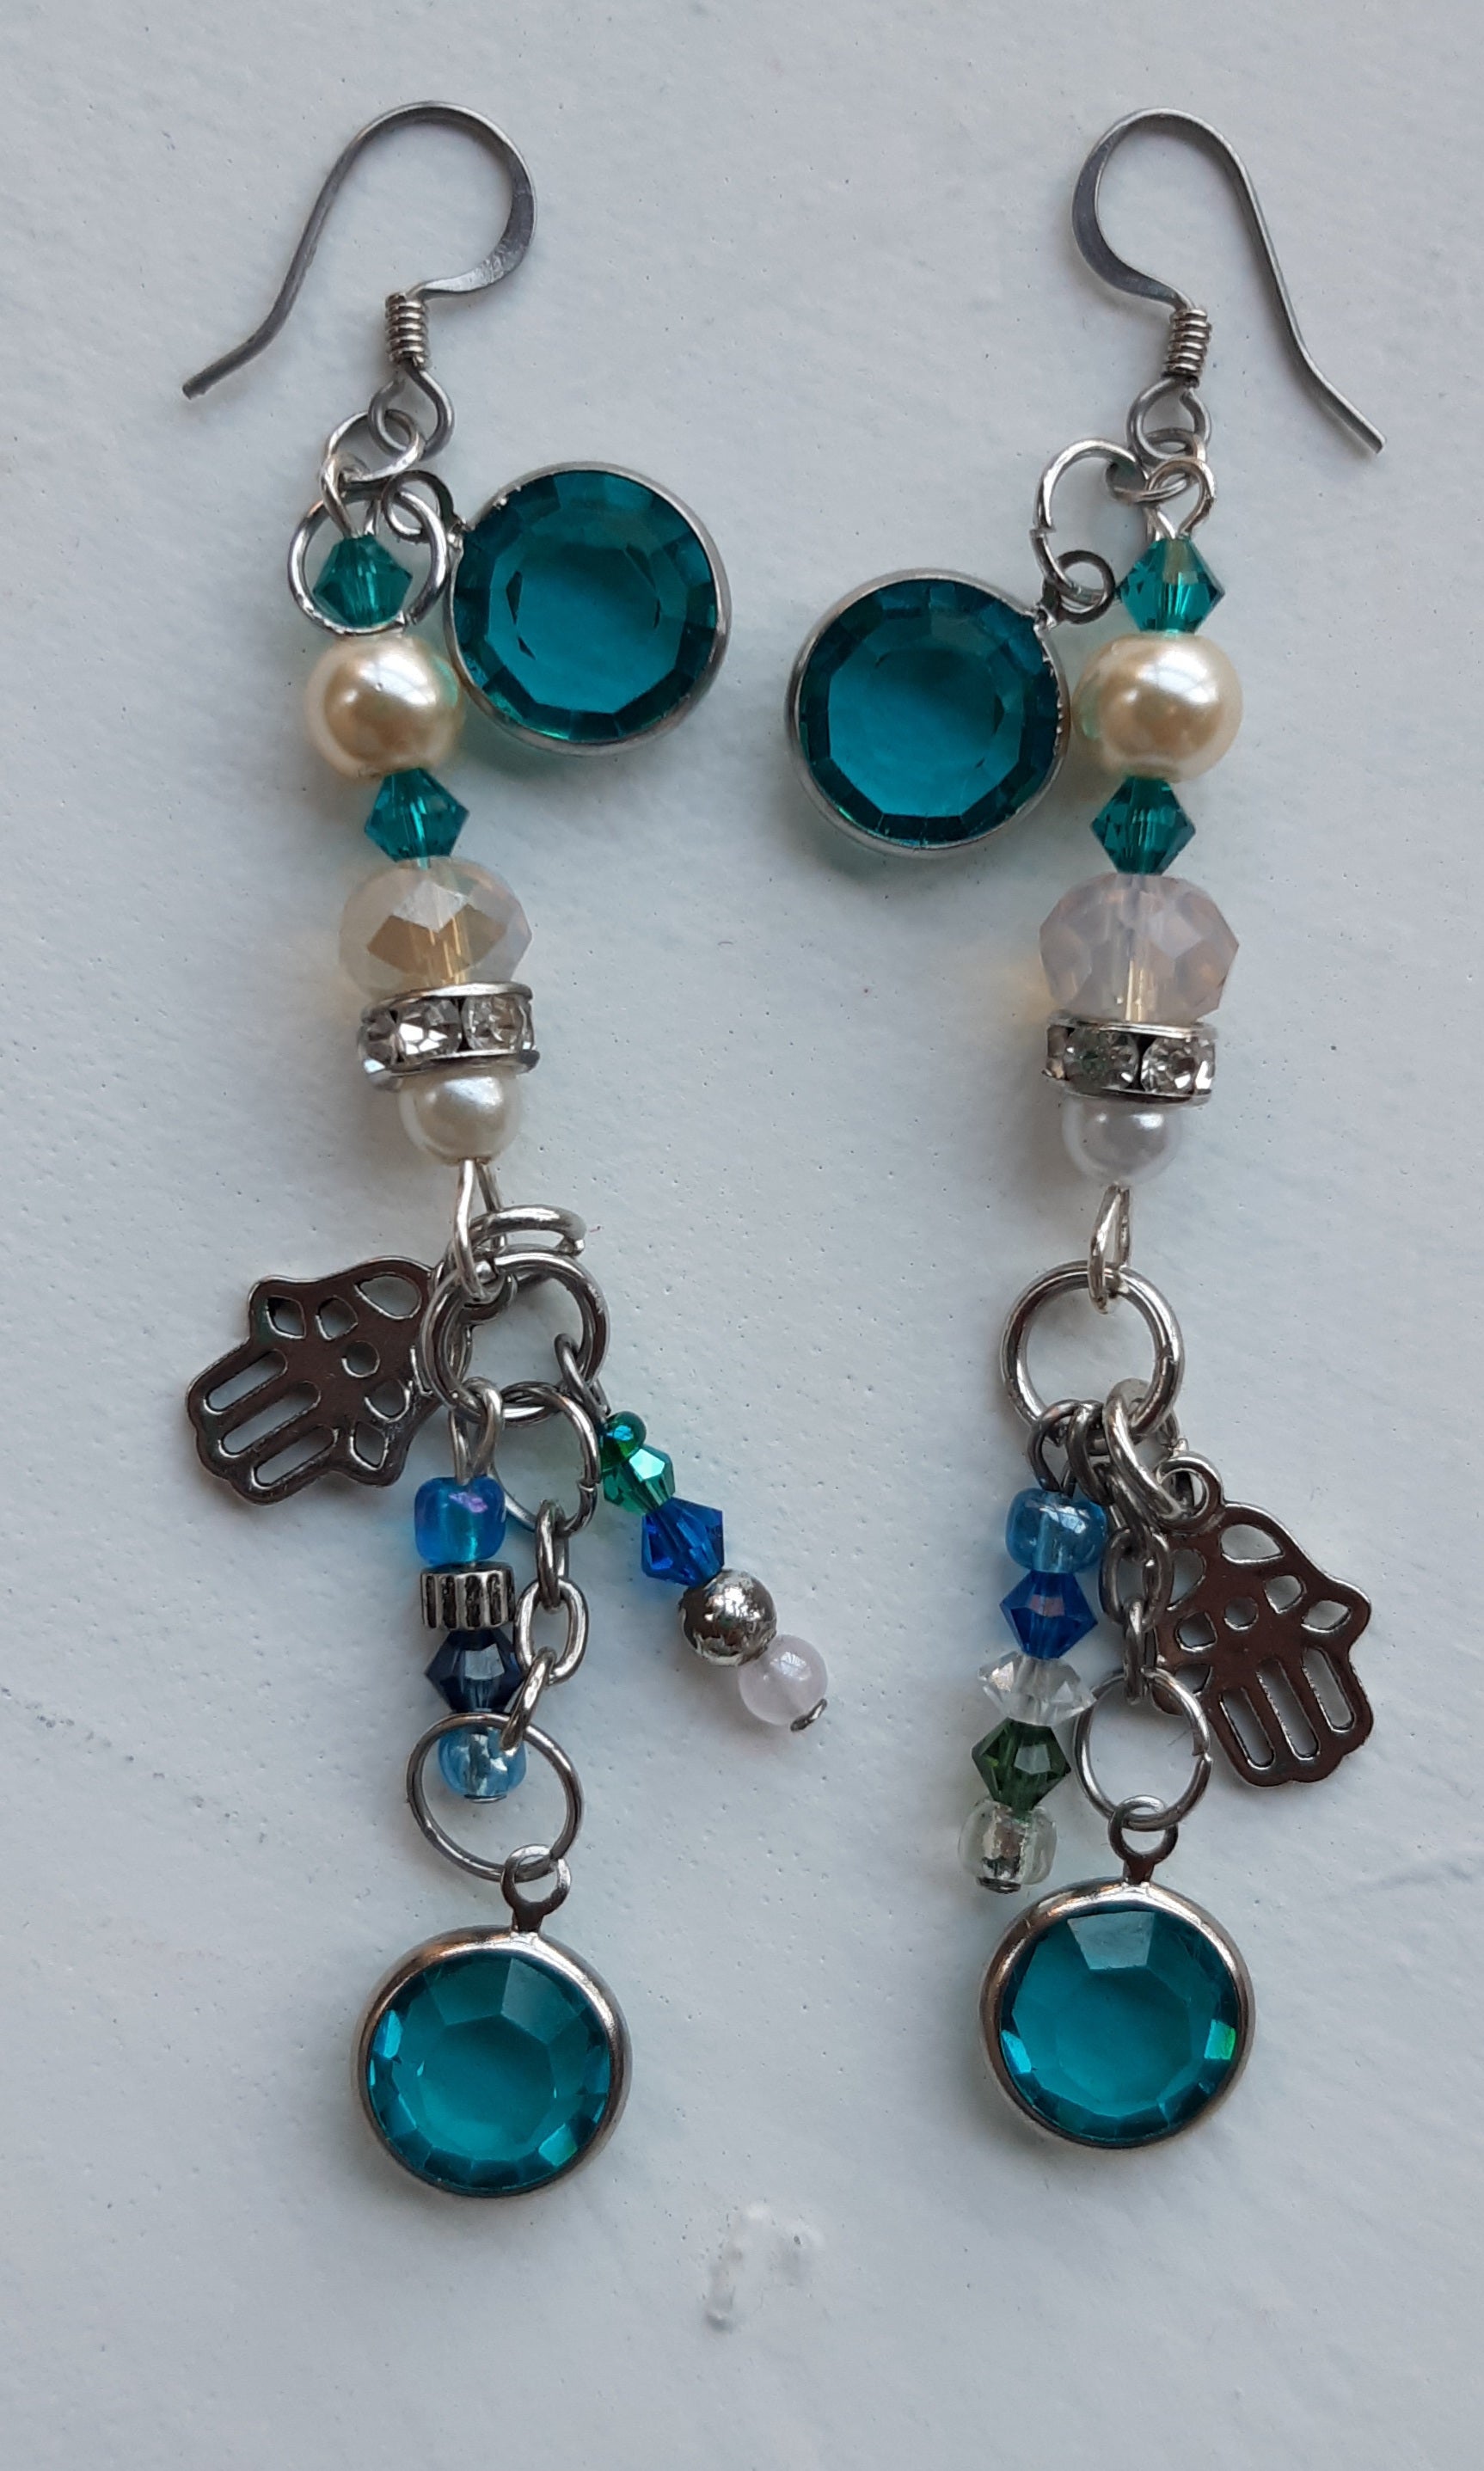 "Turquoise Crystal" Mismatched Handmade Earrings